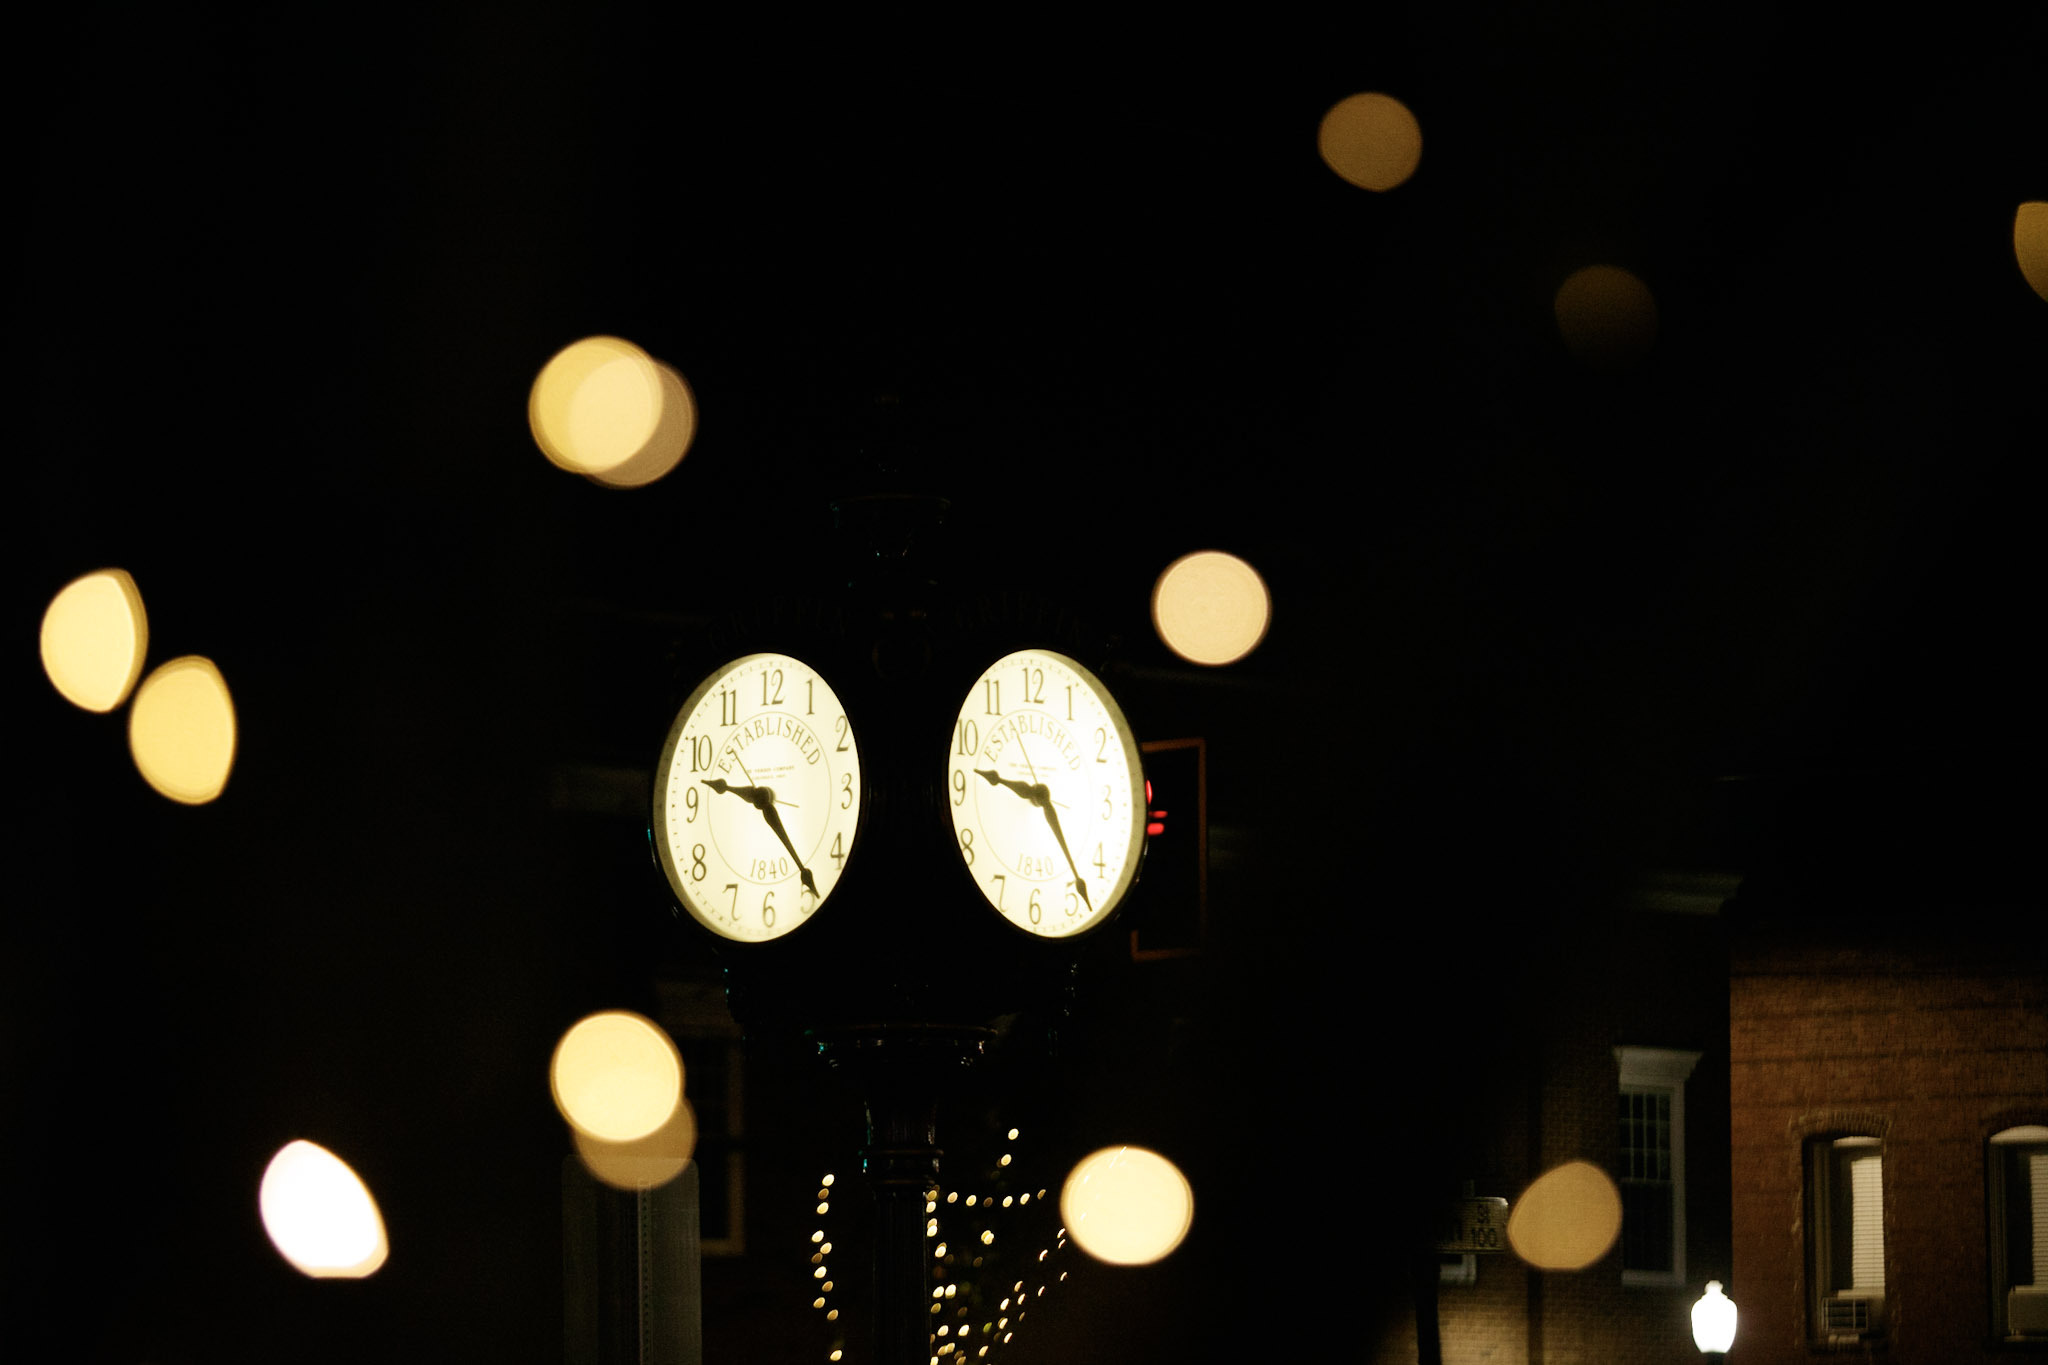 griffin clock at night